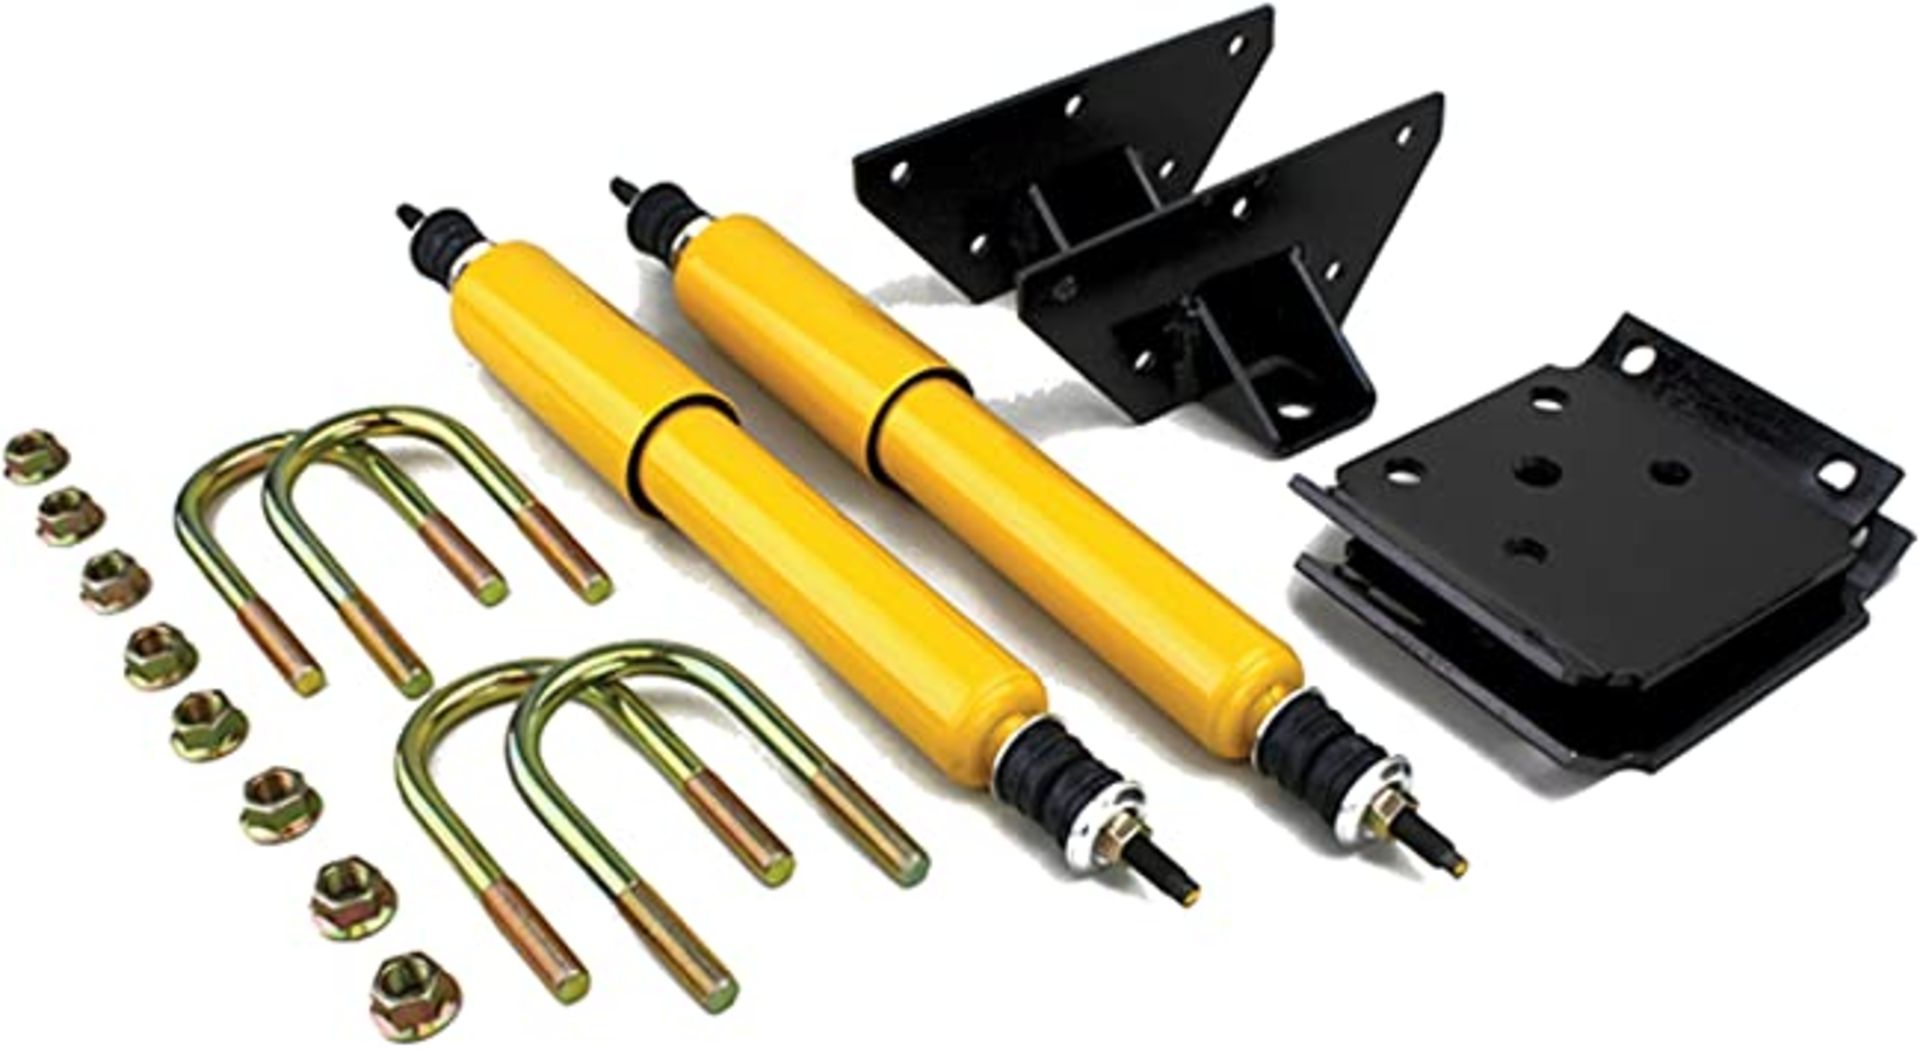 1 x Lippert Heavy Duty Gas Suspension Shock Replacement Kit - Upgrade Your RV Suspension - Part No